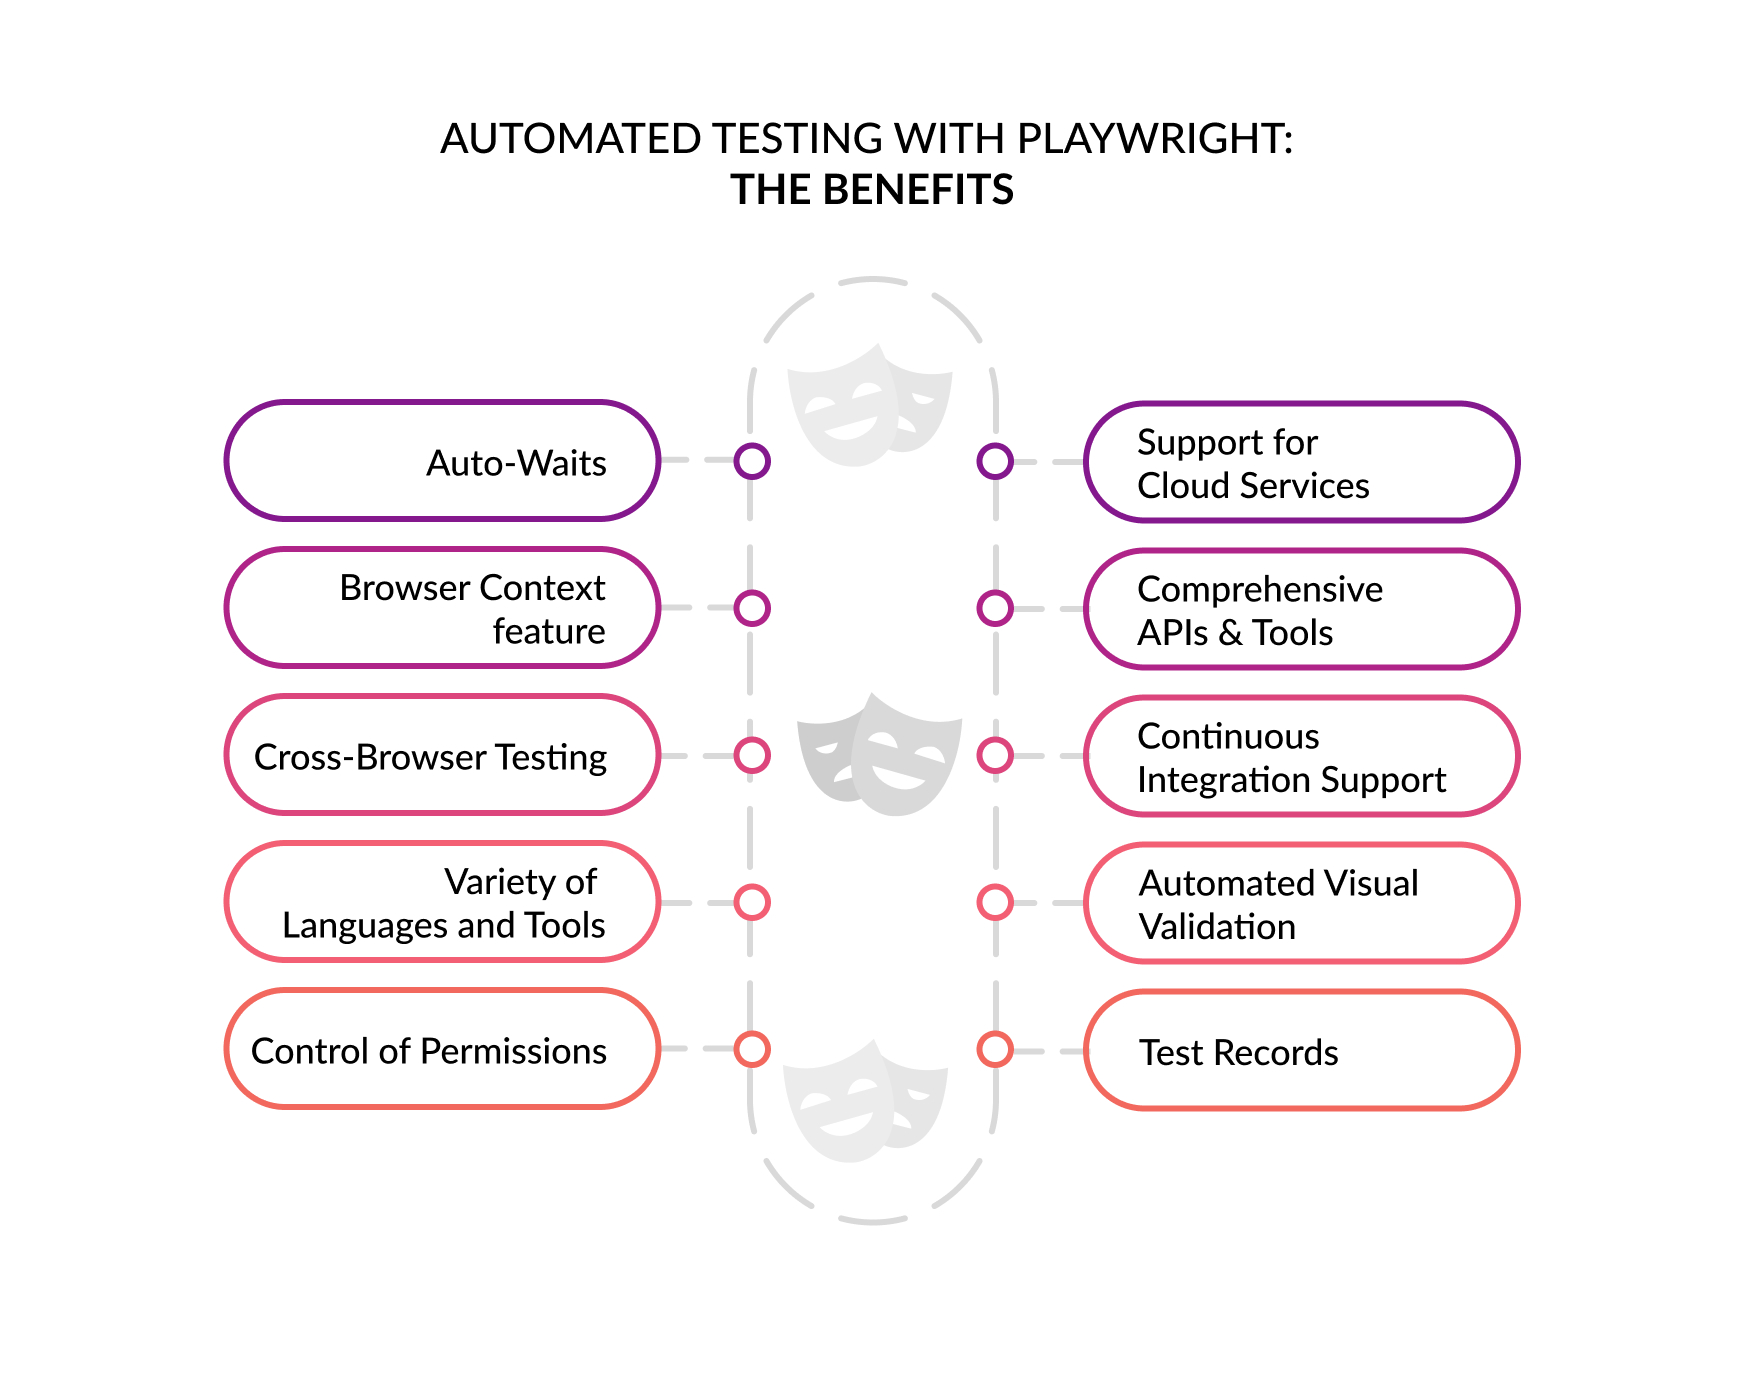 AUTOMATED TESTING WITH PLAYWRIGHT BENEFITS